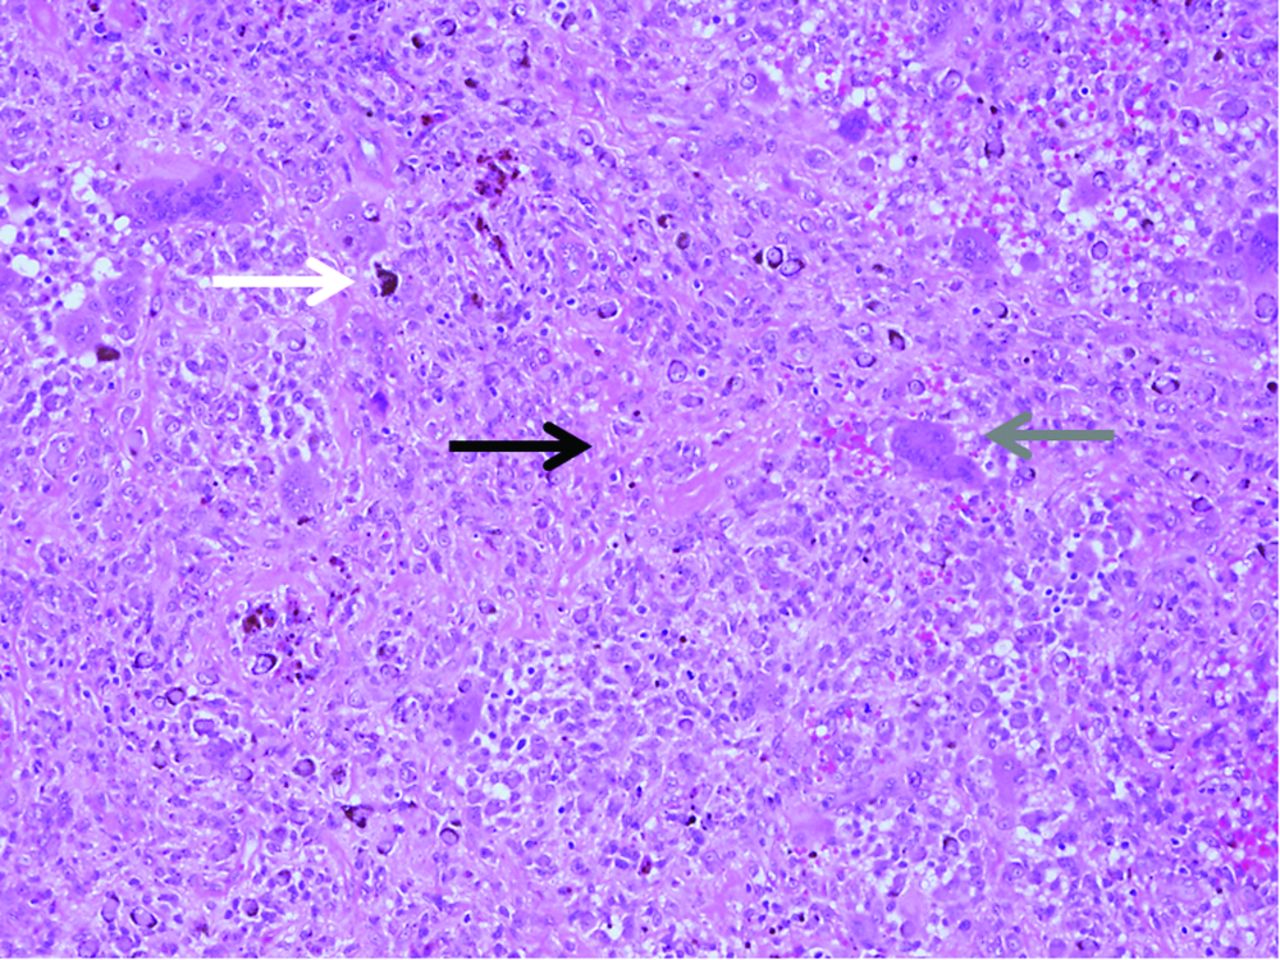 Figs. 1a - 1b 
          Photomicrographs of intra-articular
pigmented villonodular synovitis, a) at low power (original magnification
× 25), showing hyperplastic, haemosiderin-pigmented synovium and
joint space at the bottom right of the field, with the tumour vaguely
nodular, collagen rich and displaying incipient clefts, and b) at
high power (original magnification × 100), showing the tumour composed
of a disorderly mass of histiocytes (often containing haemosiderin)
(white arrow), osteoclast-like giant cells (grey arrow), and plump
fibroblasts depositing collagenous matrix (black arrow).
        